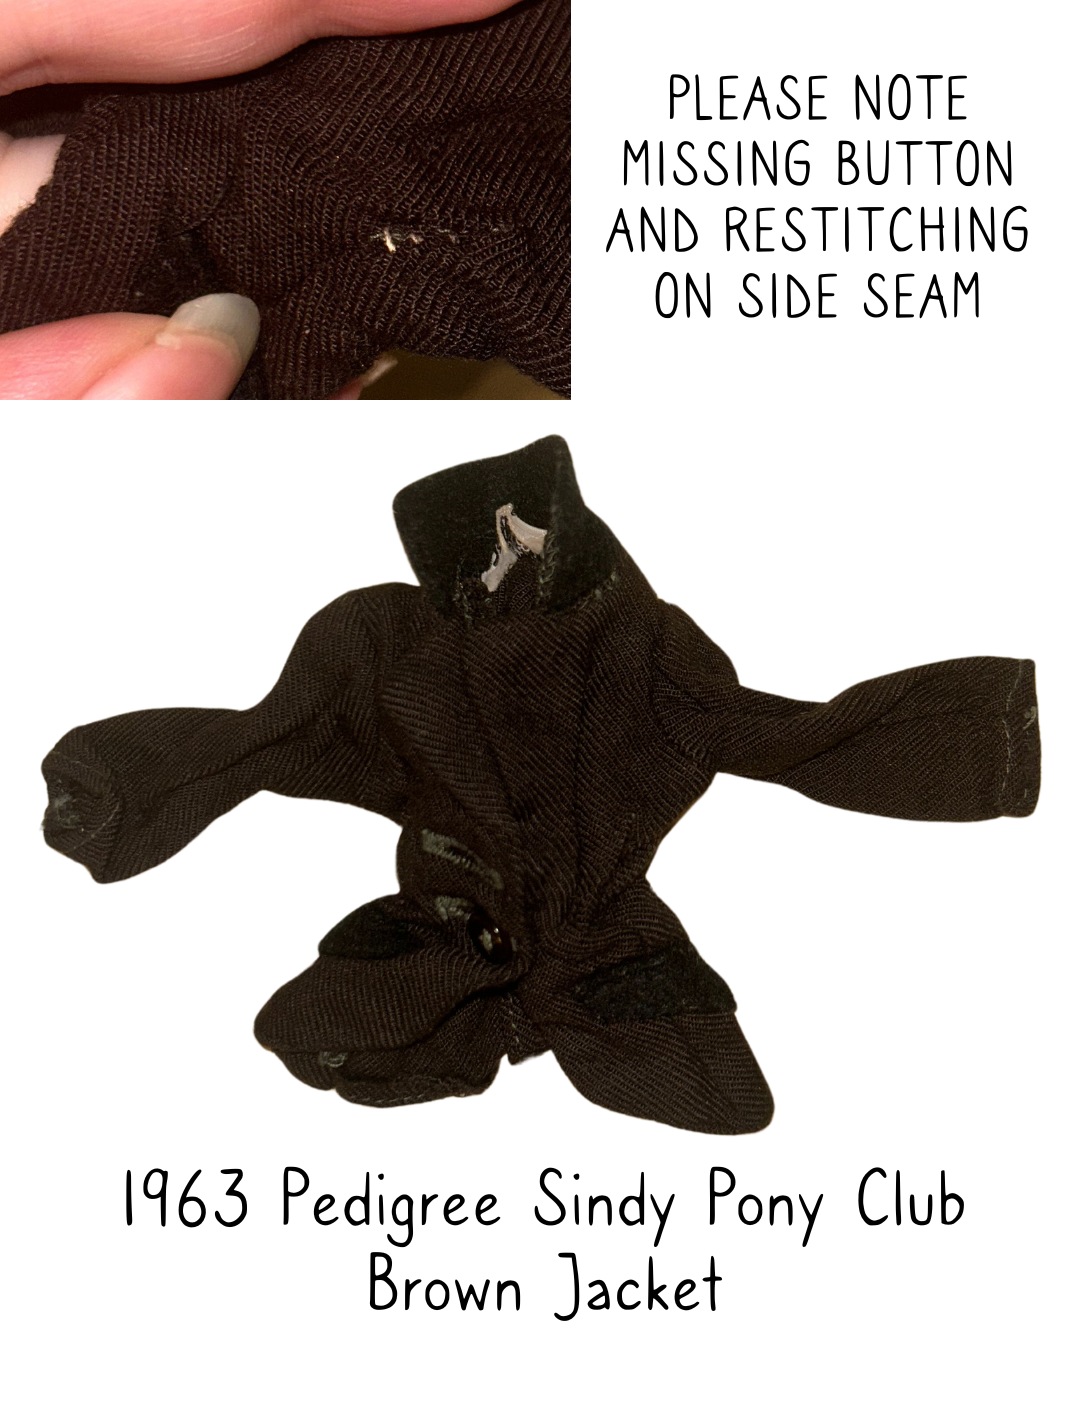 1963 Sindy Pony Club Jacket with Missing Button